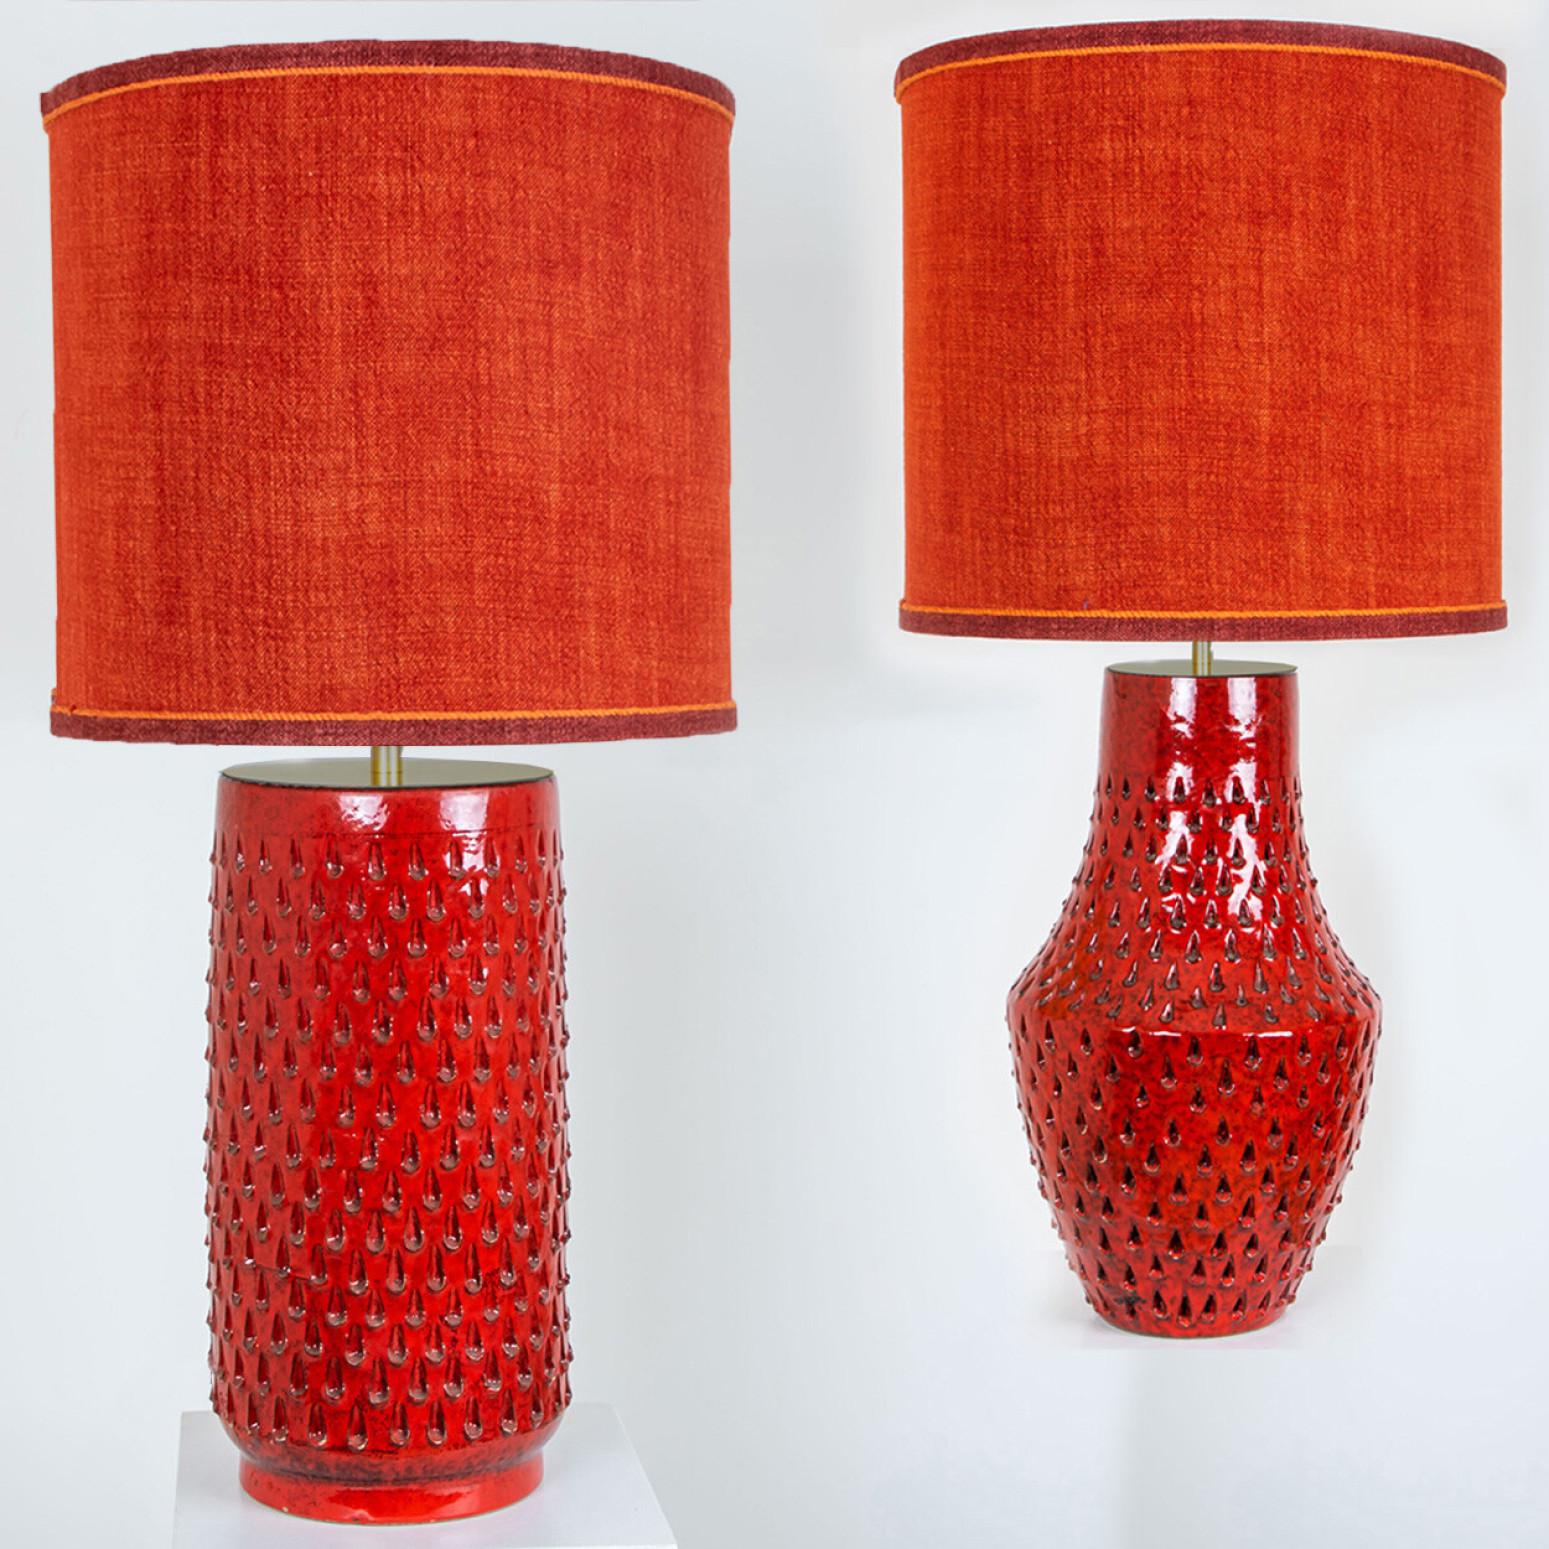 Fratelli Fanciullacci Ceramic Table Lamp with New Custom Made Lampshade, 1970 For Sale 11